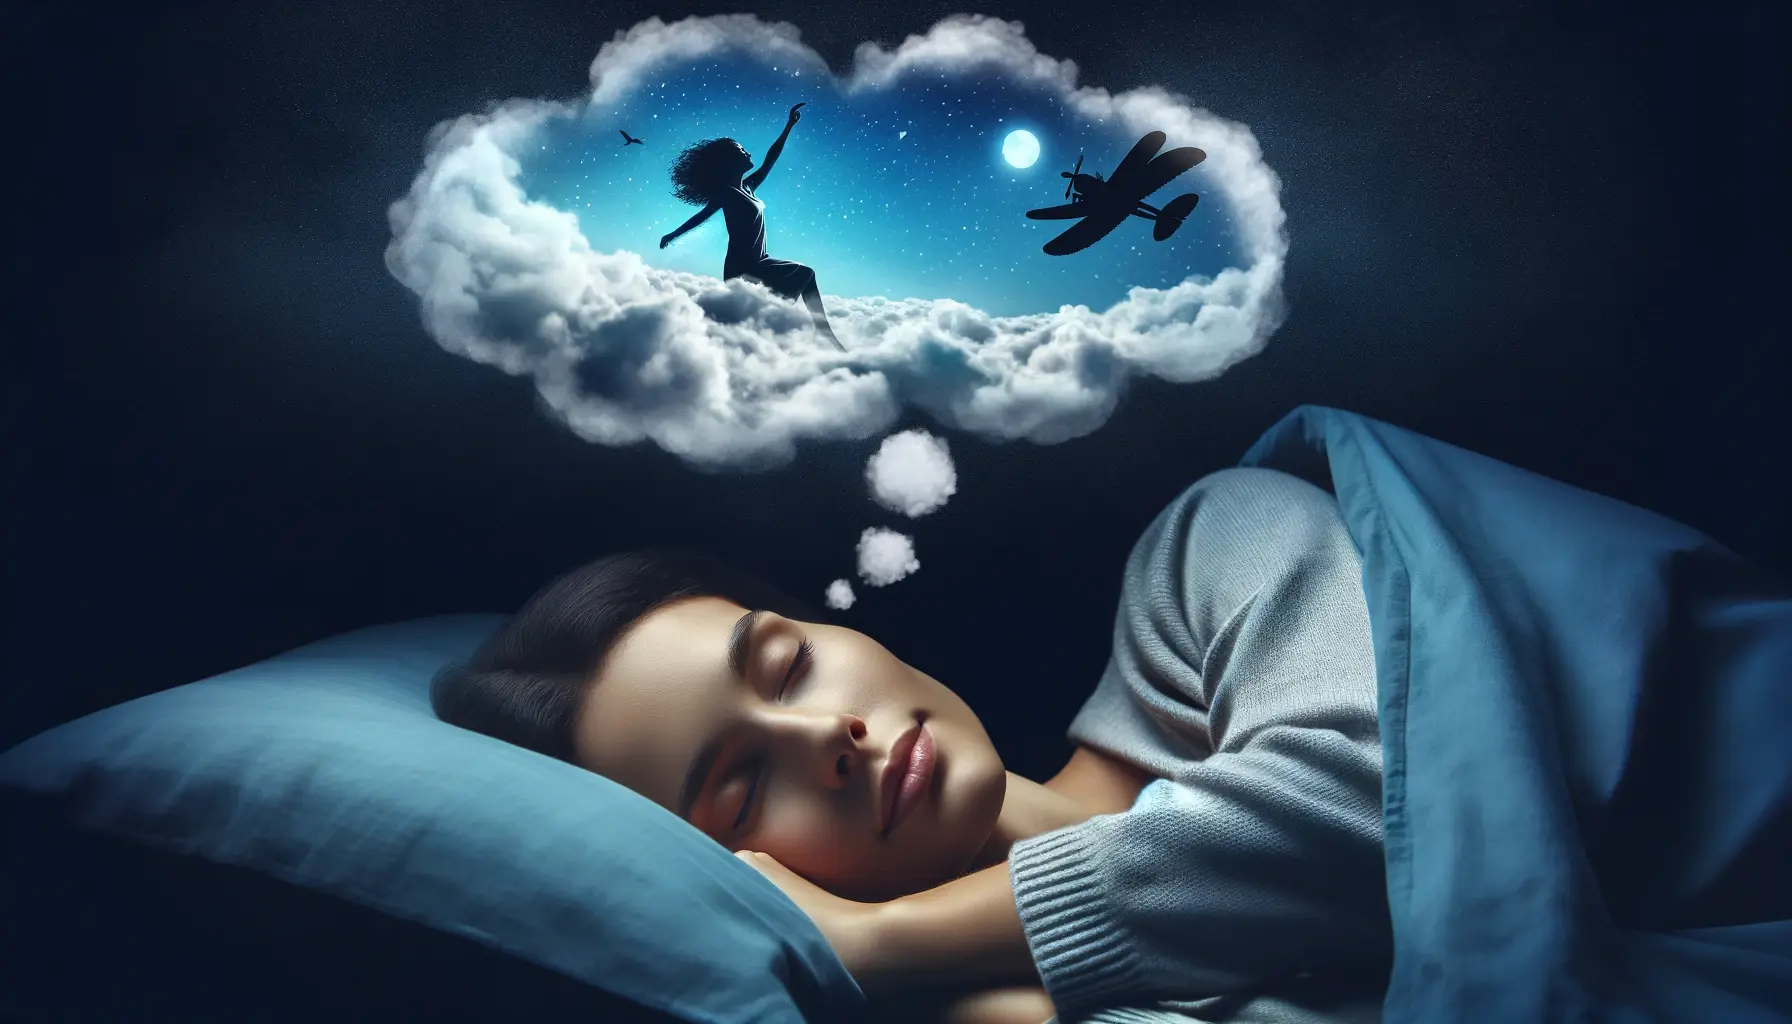 common-recurrent-dreams-and-their-psychological-meanings